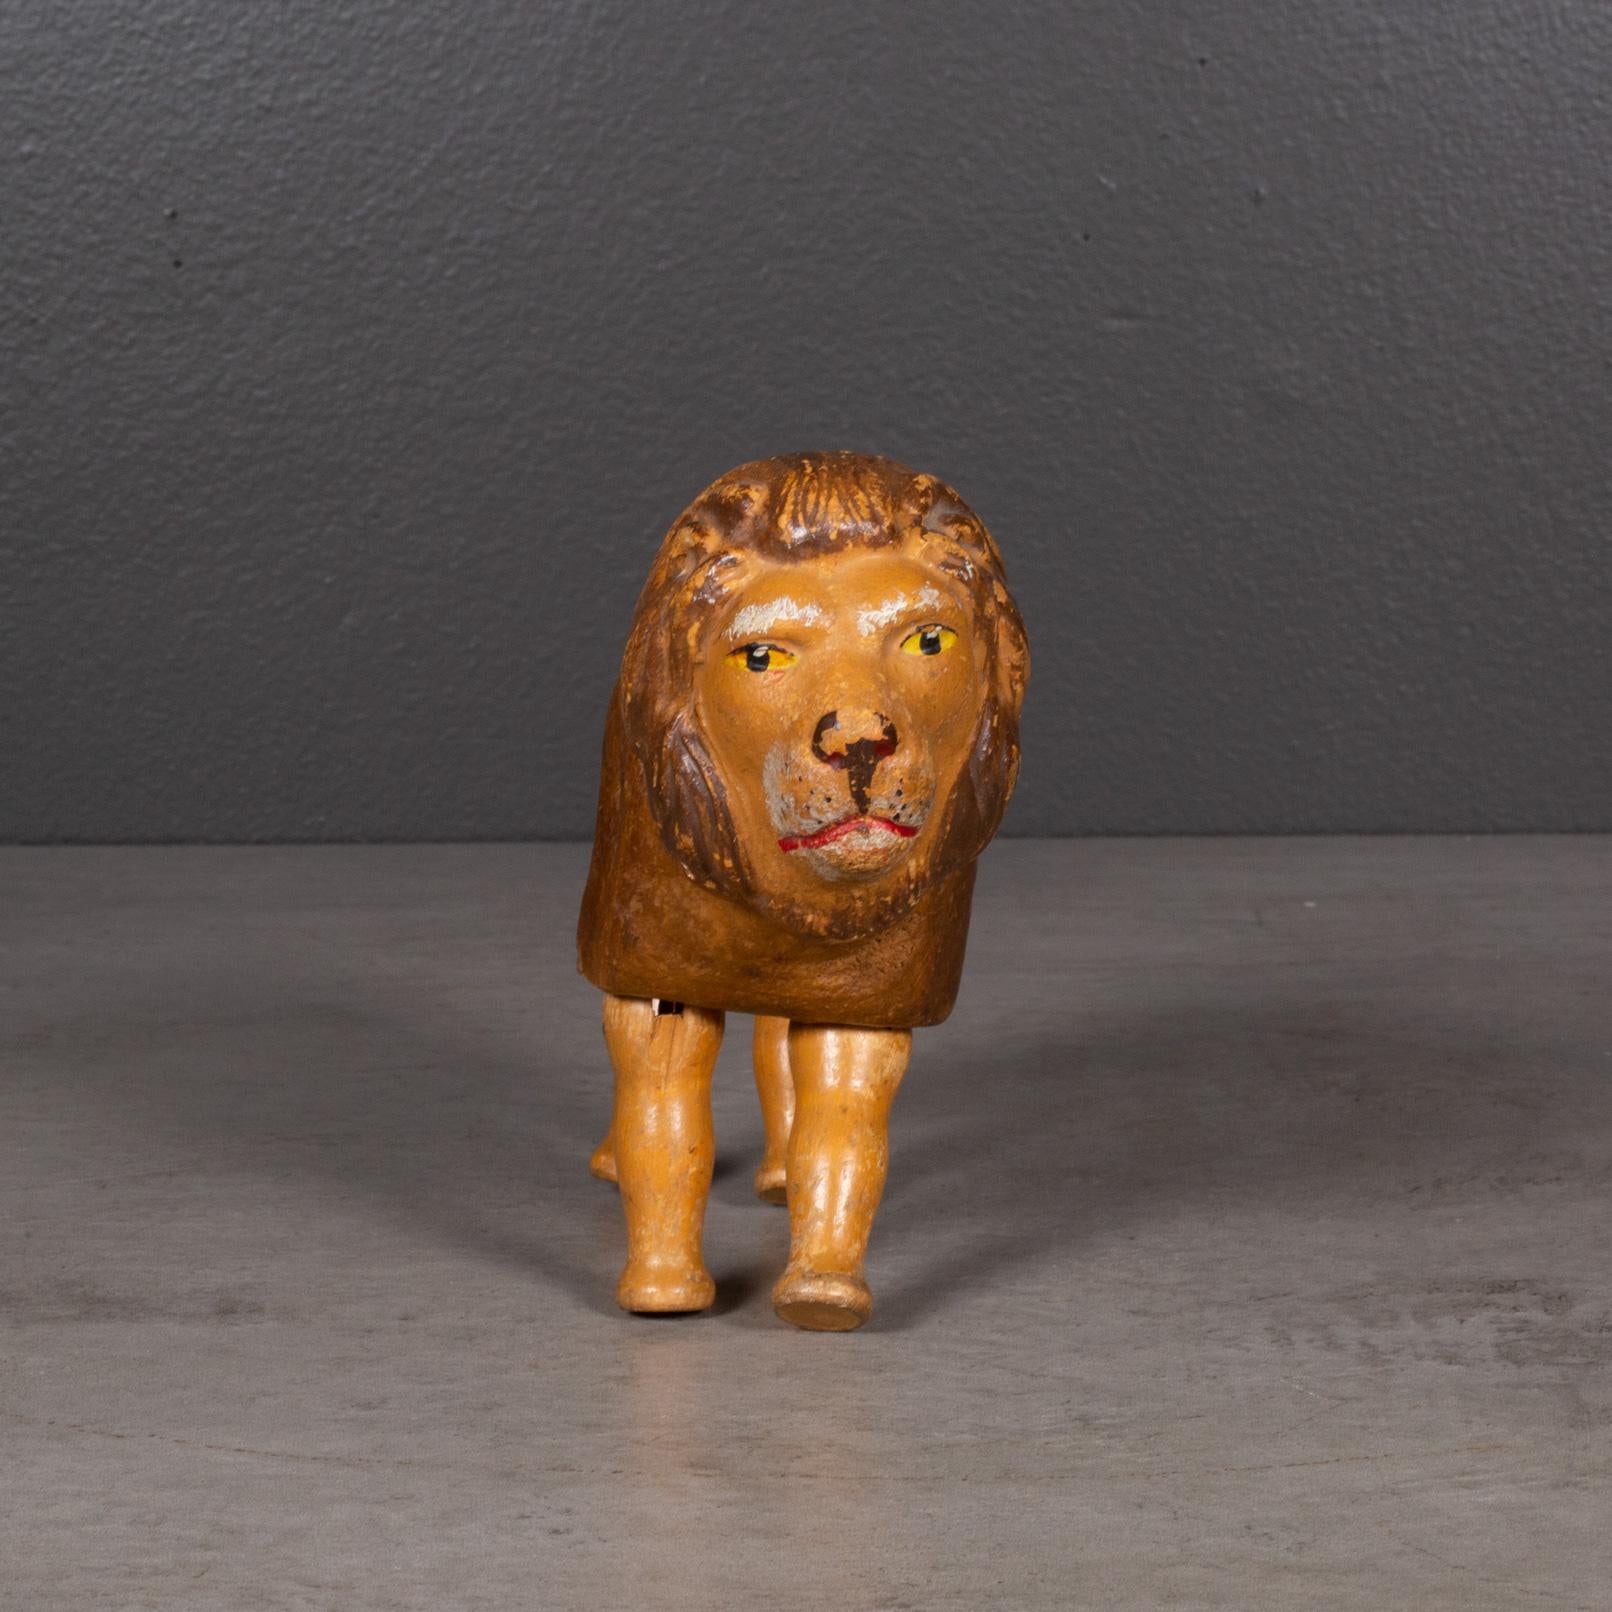 ABOUT

Jointed wooden lion manufactured in the 1900s by the Schoenhut Piano Company as part of the 